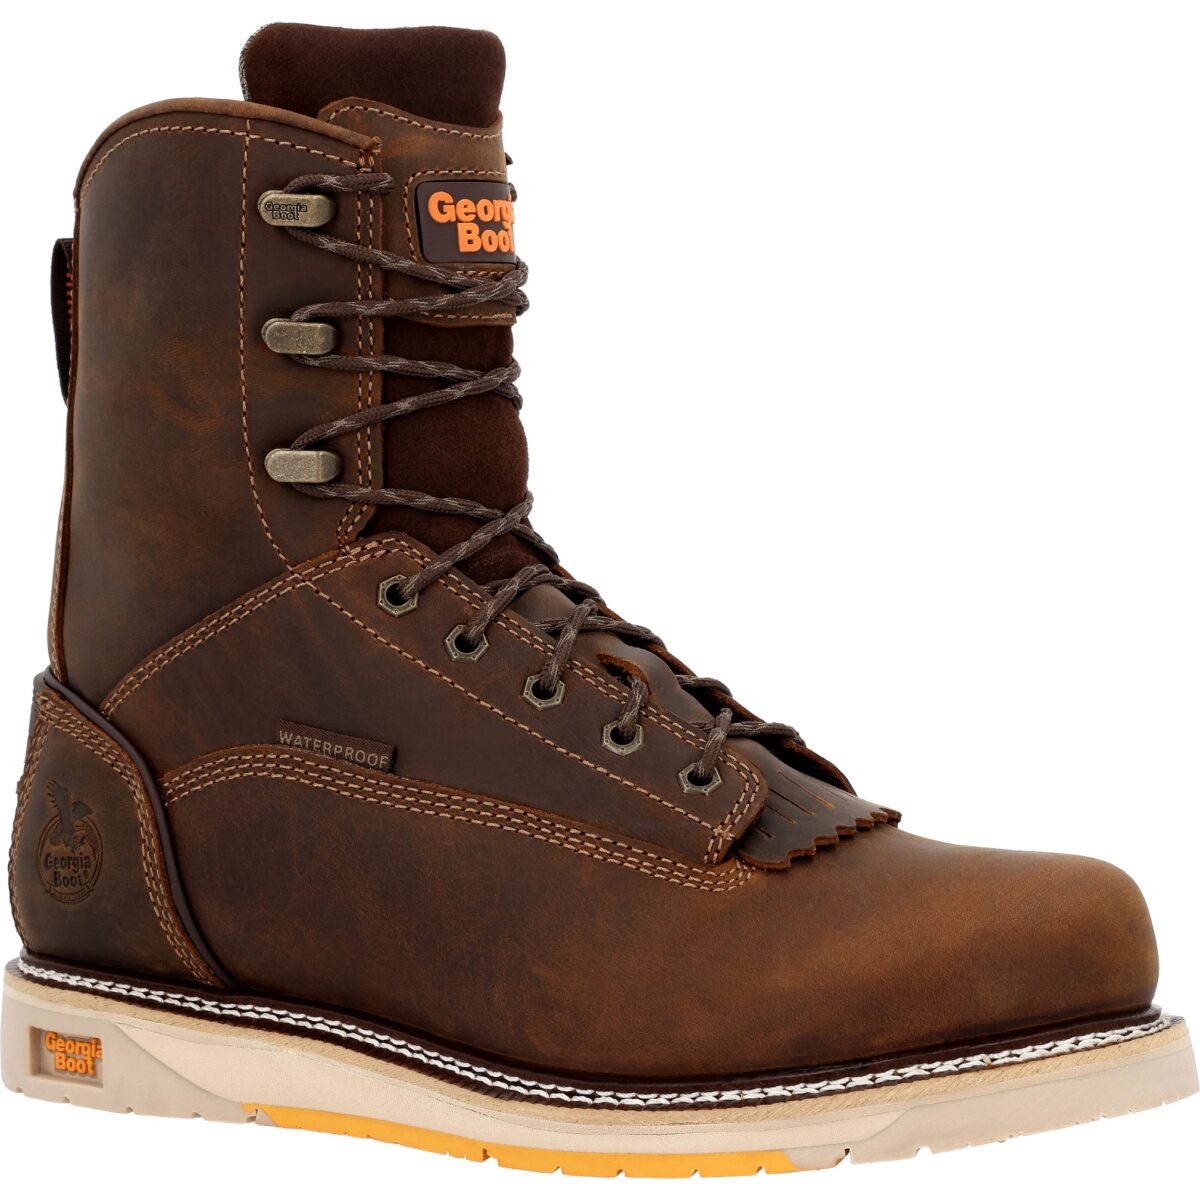 Georgia Boot adds an 8-inch work boot (GB00593) to its AMP LT Wedge collection of working boots.